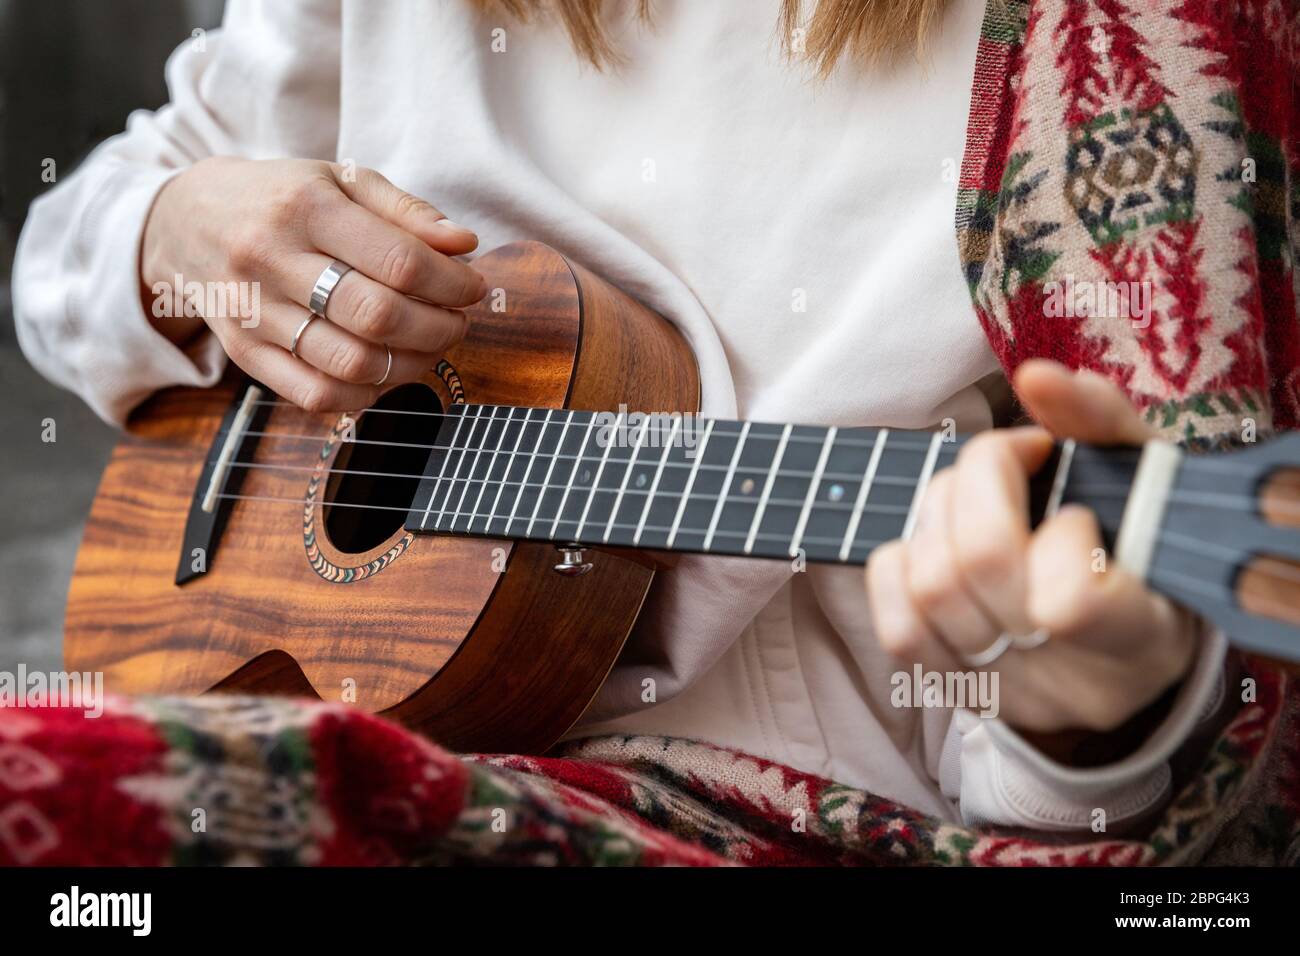 Woman playing Hawaiian guitar, sings a song on vintage ukulele at home. Selective focus. Close up. Stock Photo